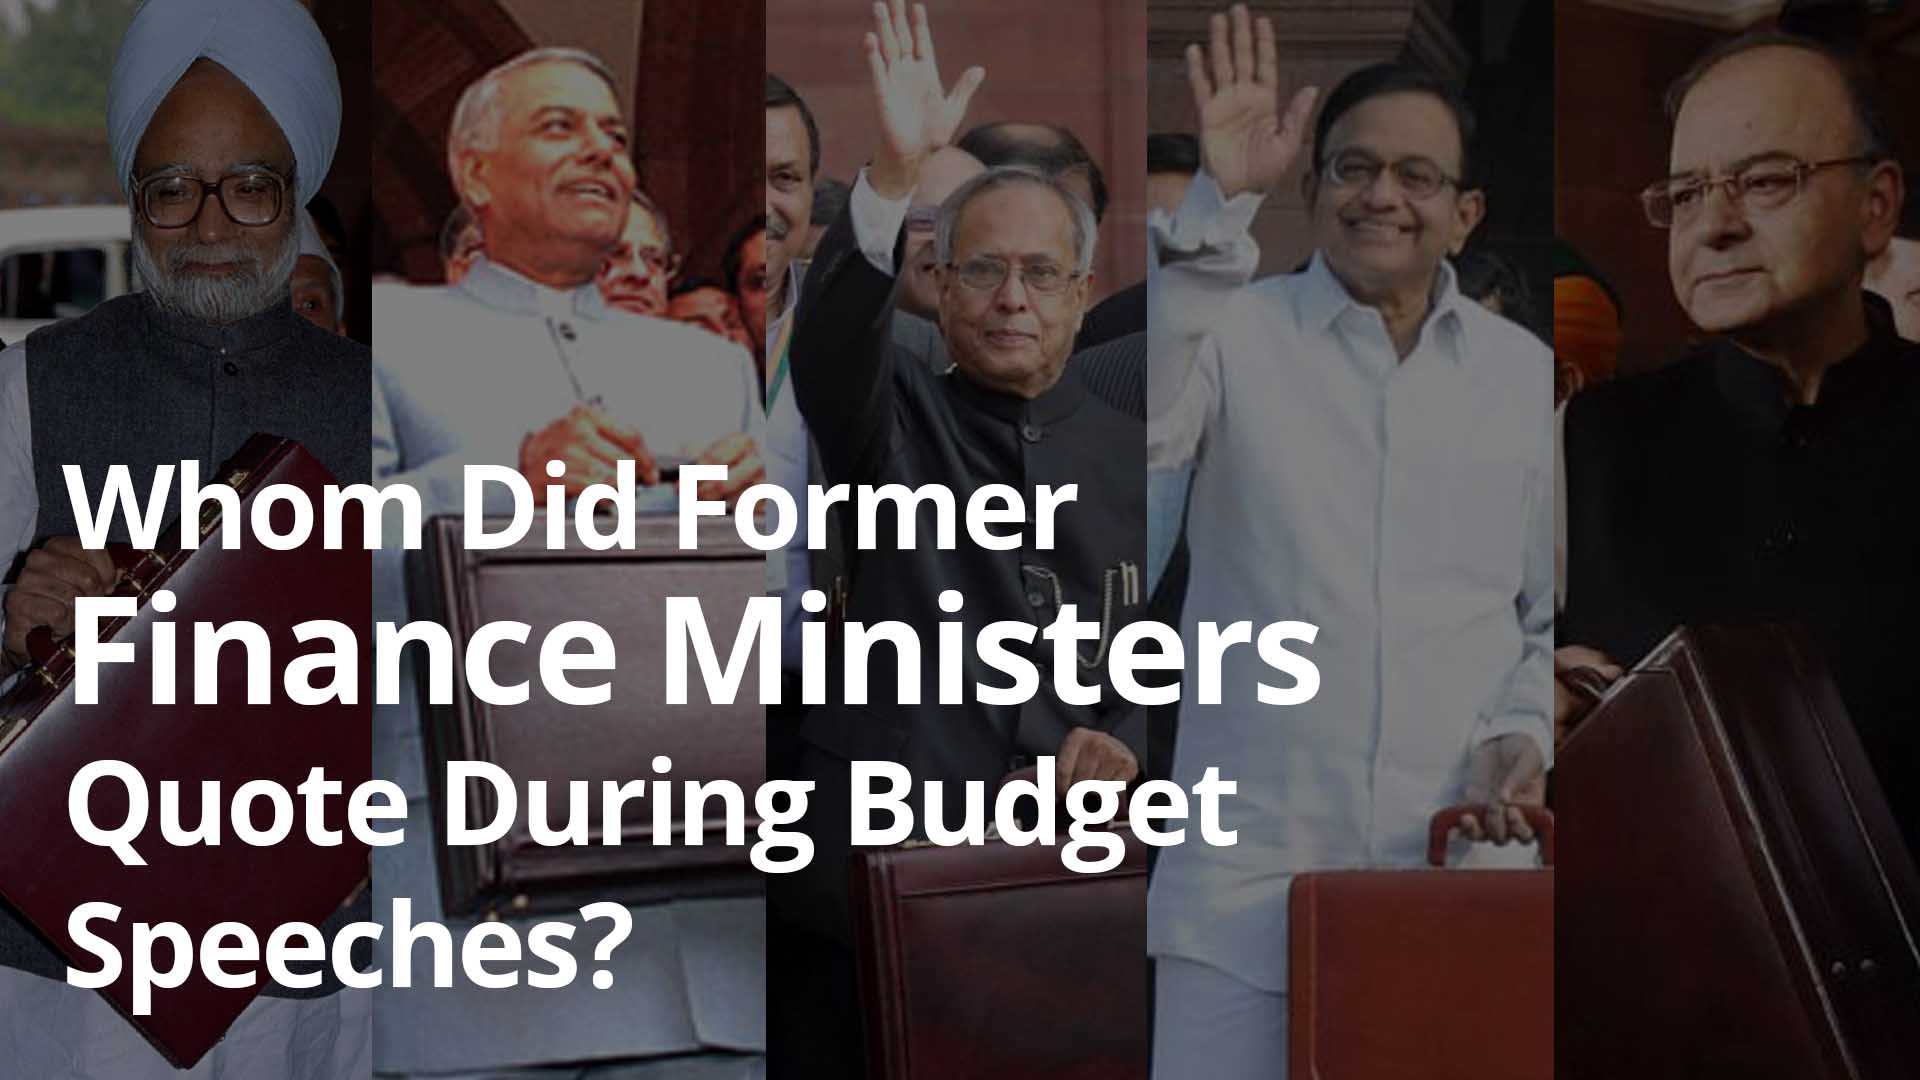 Whom did former finance ministers quote during Budget speeches?